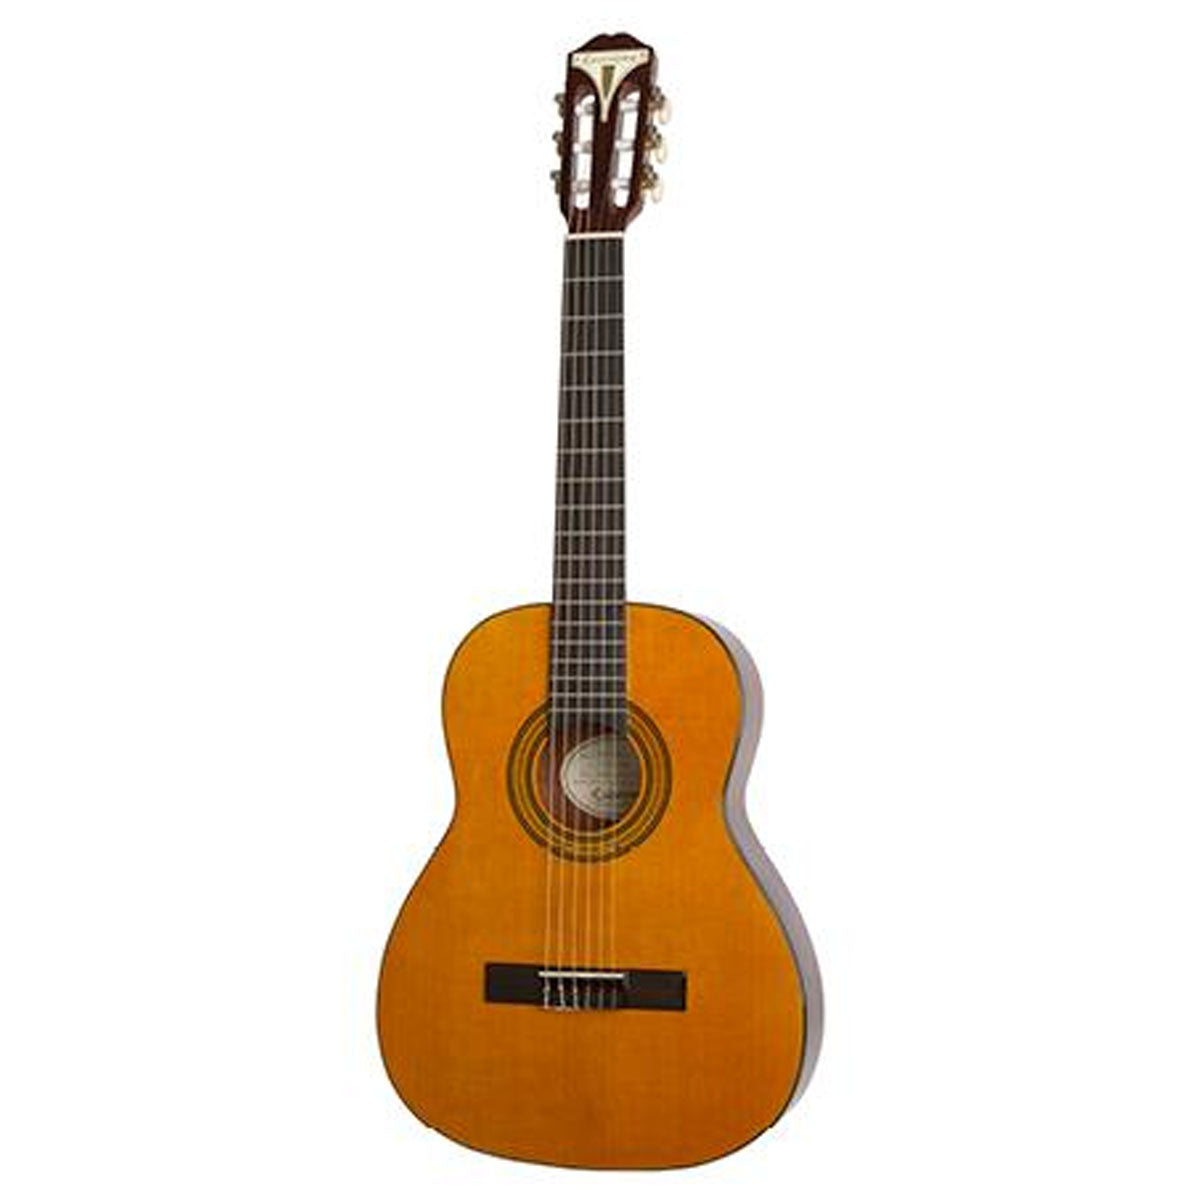 Epiphone PRO-1 Classical Guitar 3/4 Nylon Antique Natural - EAC3ANCH1